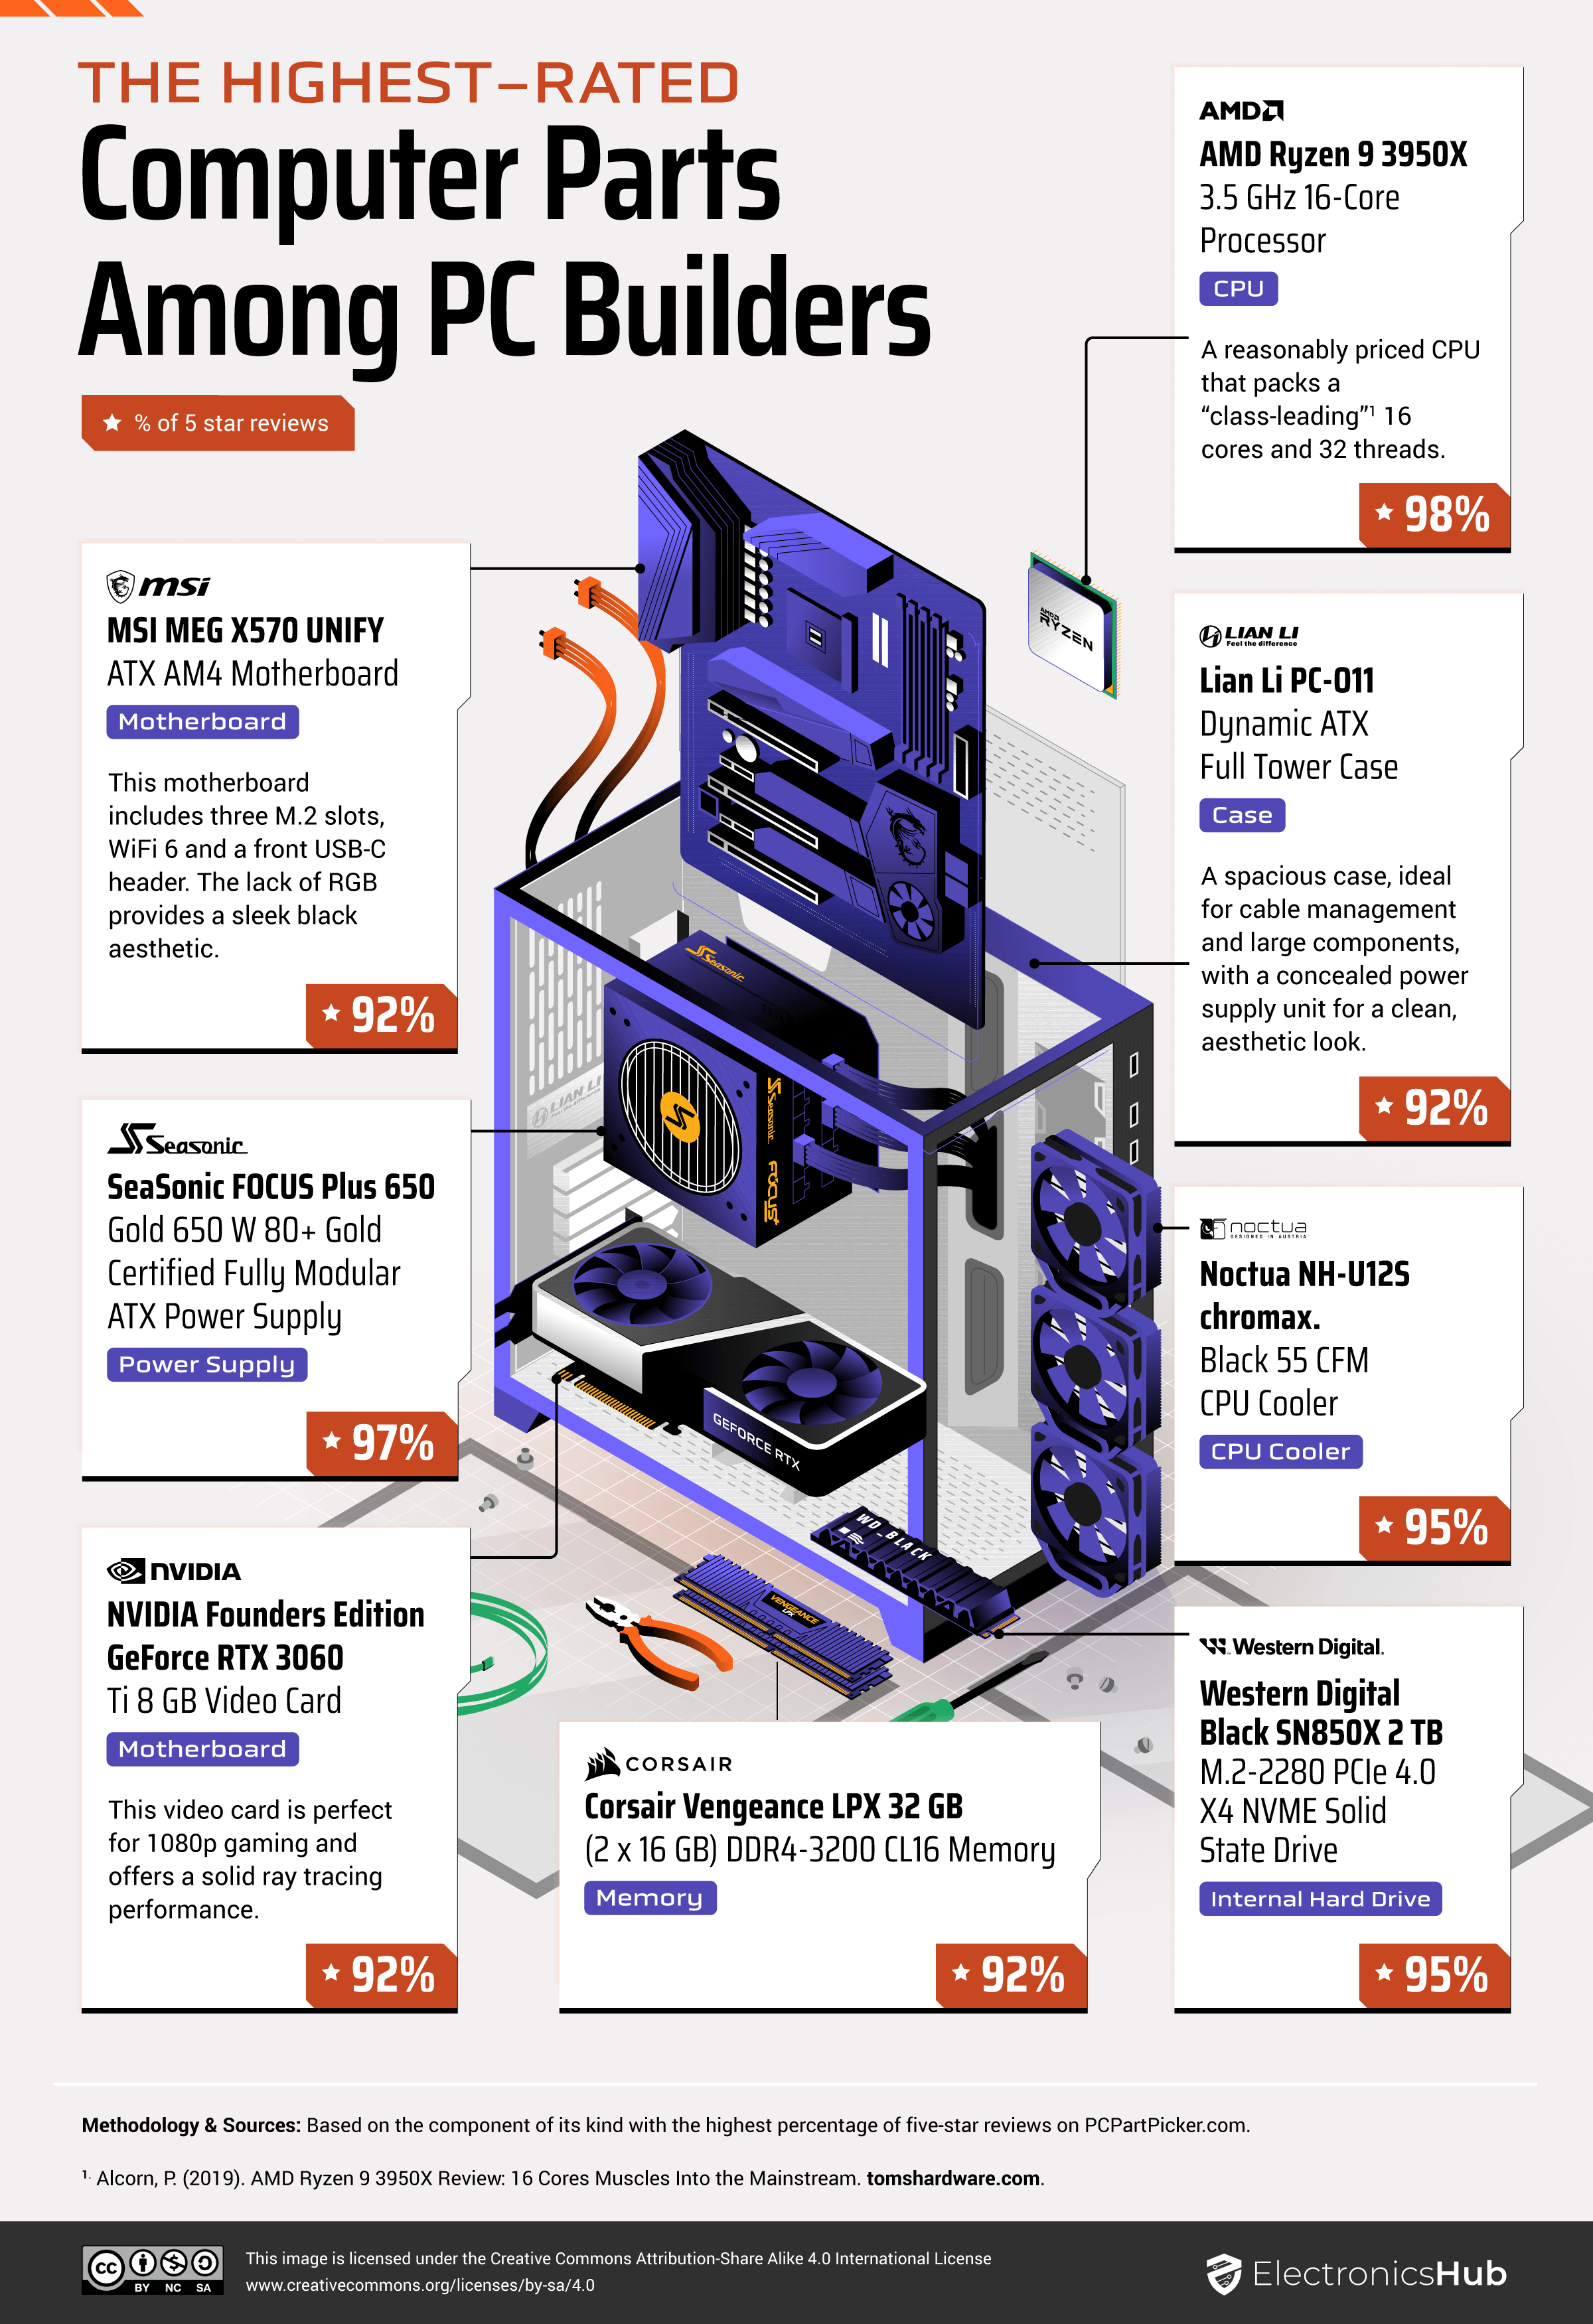 01_Highest-rated-computer-parts-among-PC-builders.png